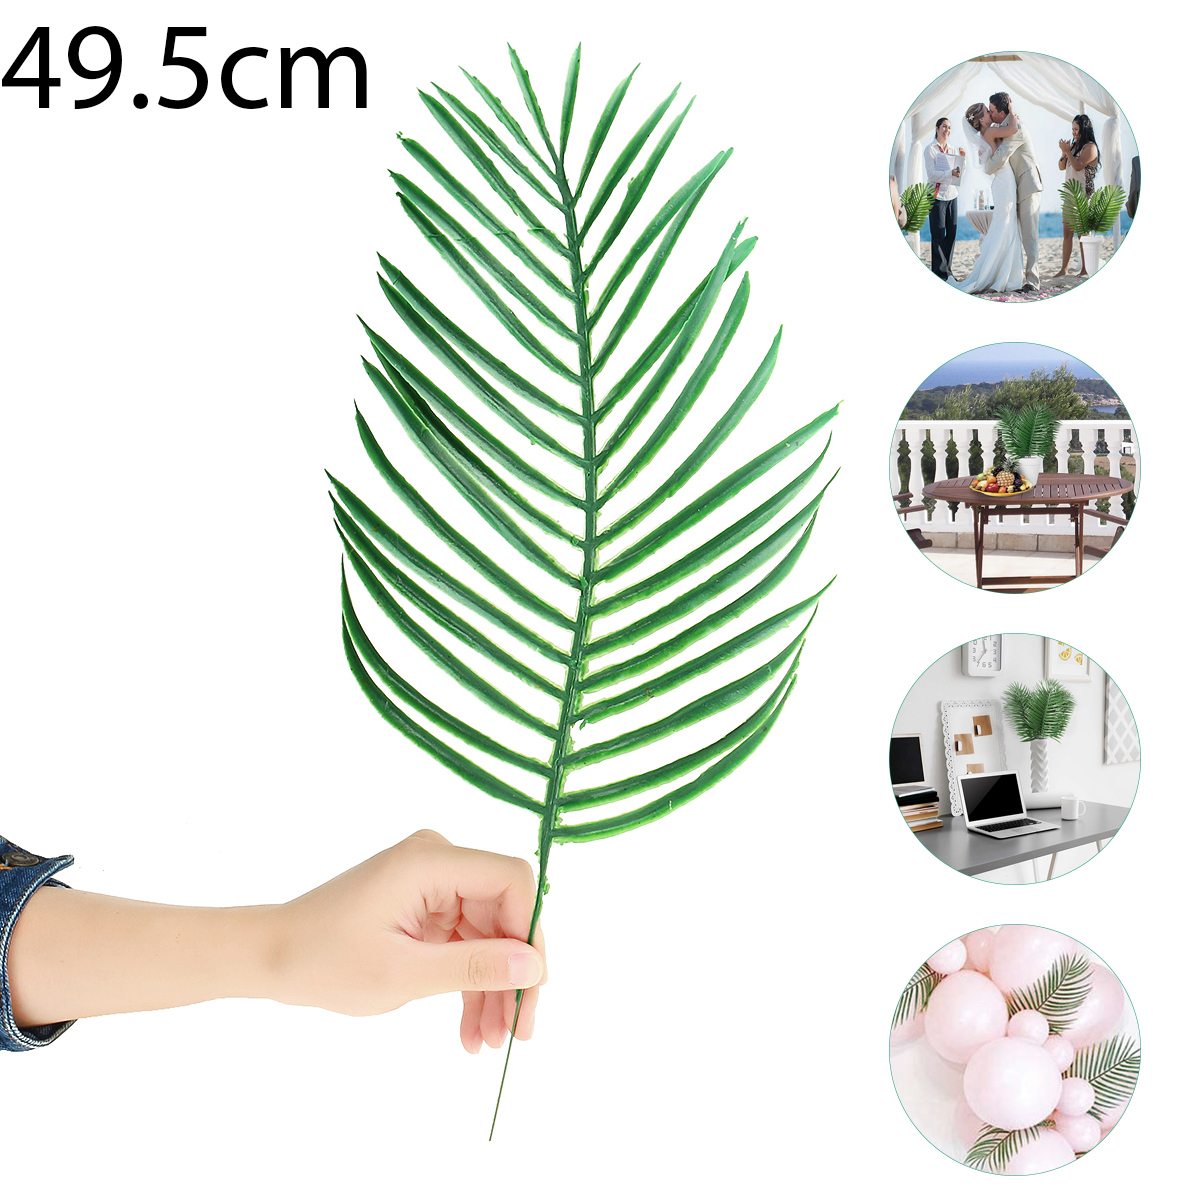 Artificial-Palm-Tree-Faux-Leaves-Green-Plants-Greenery-for-Flowers-Decorations-1497292-9